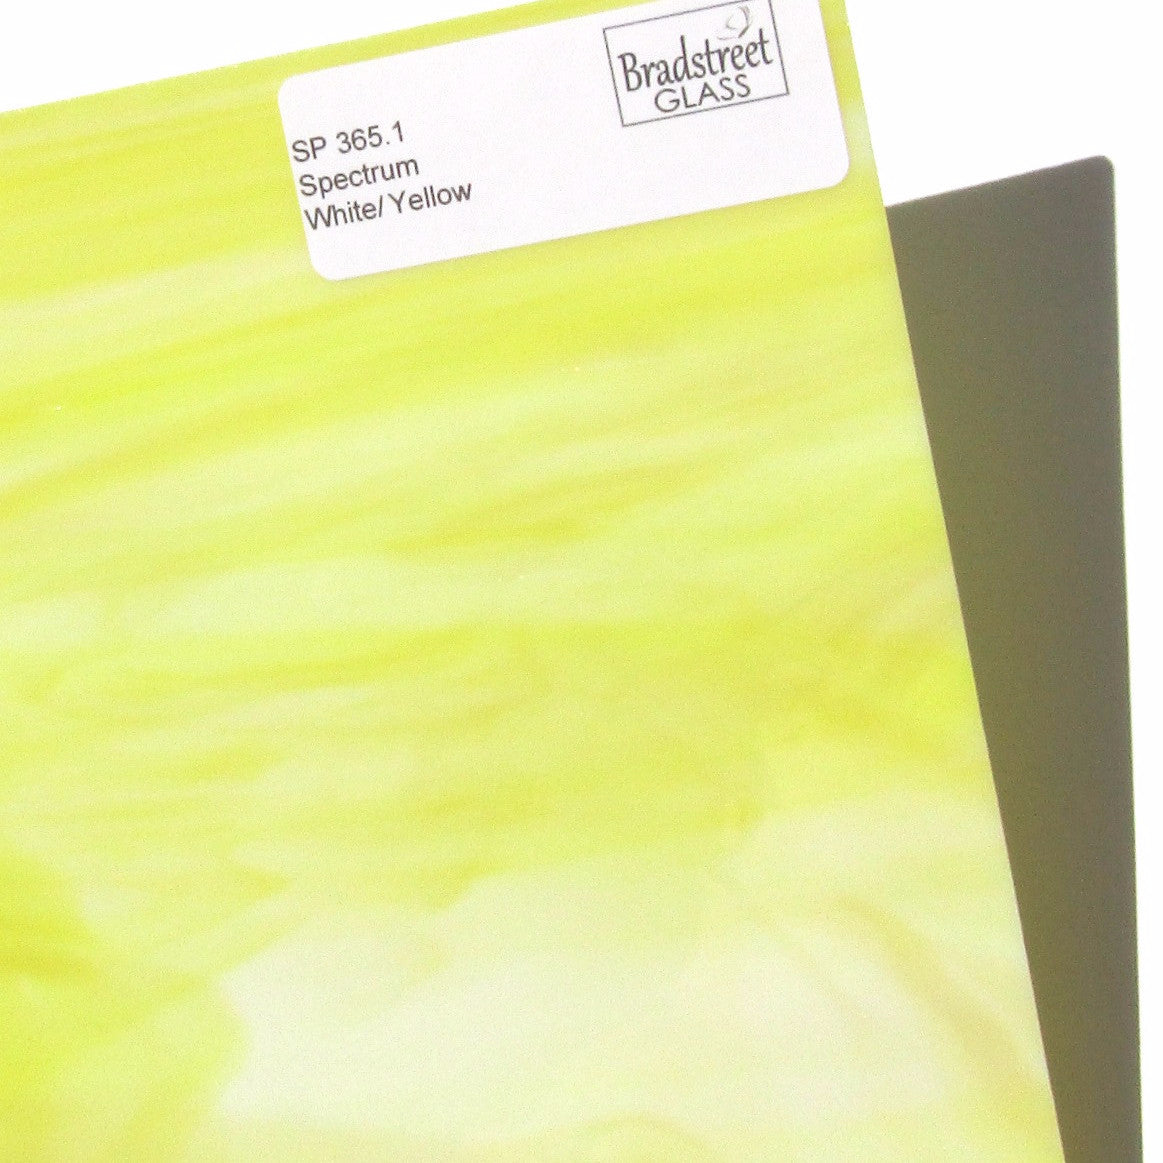 Spectrum White Yellow Wispy Stained Glass Sheet SP 365.1